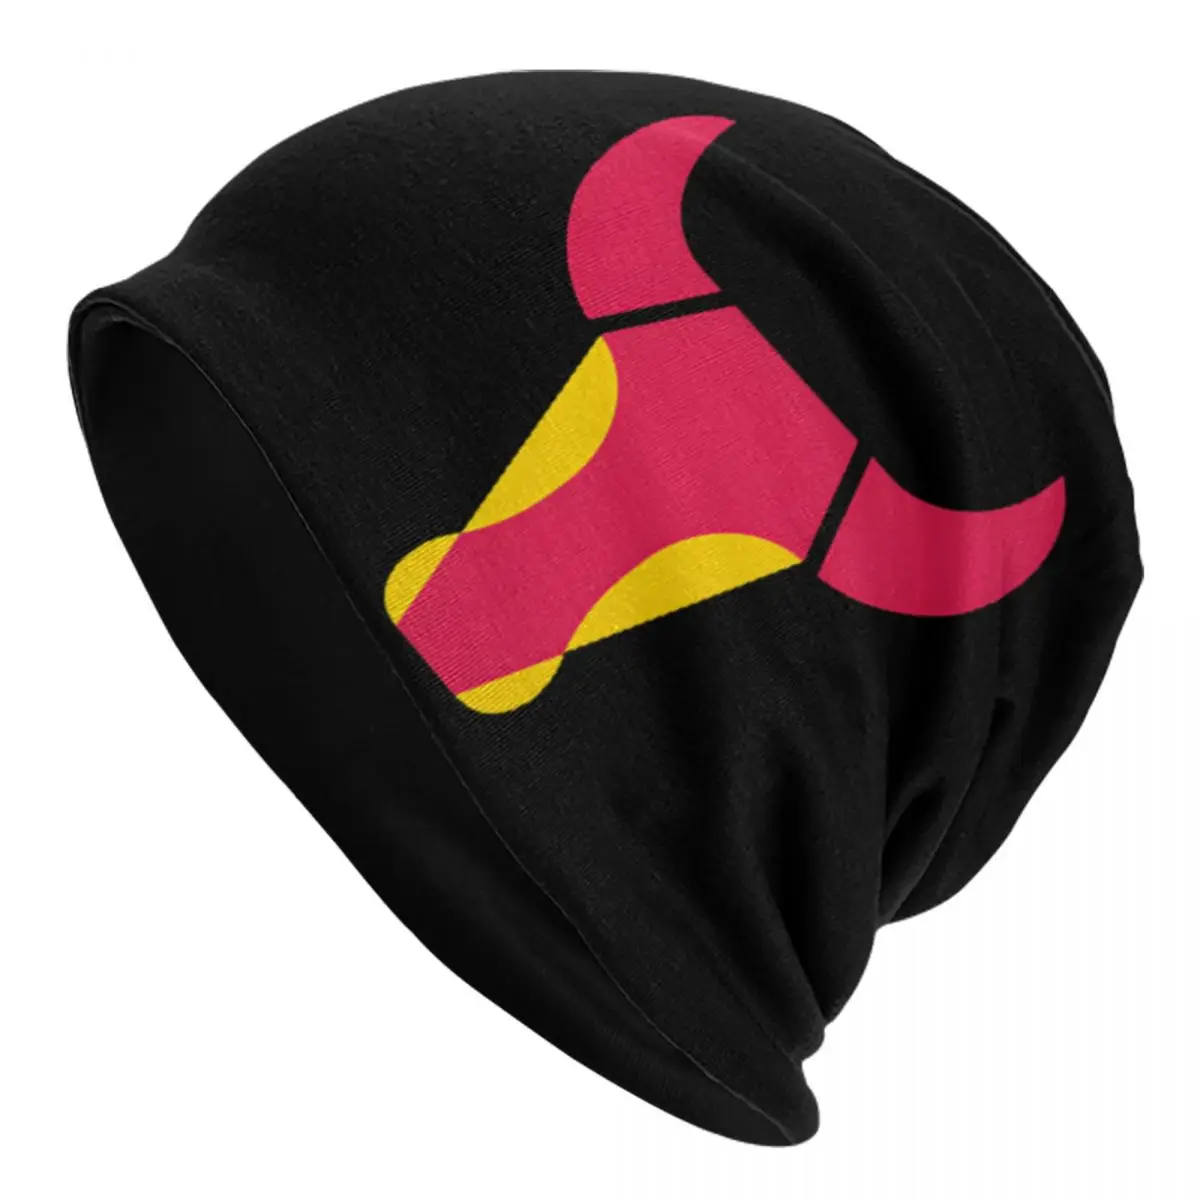 

Cool Extreme Athlete Reds Sports Beanie Caps Double-Bull Accessories Bonnet Knitted Hats Awesome Winter Warm Skullies Beanies